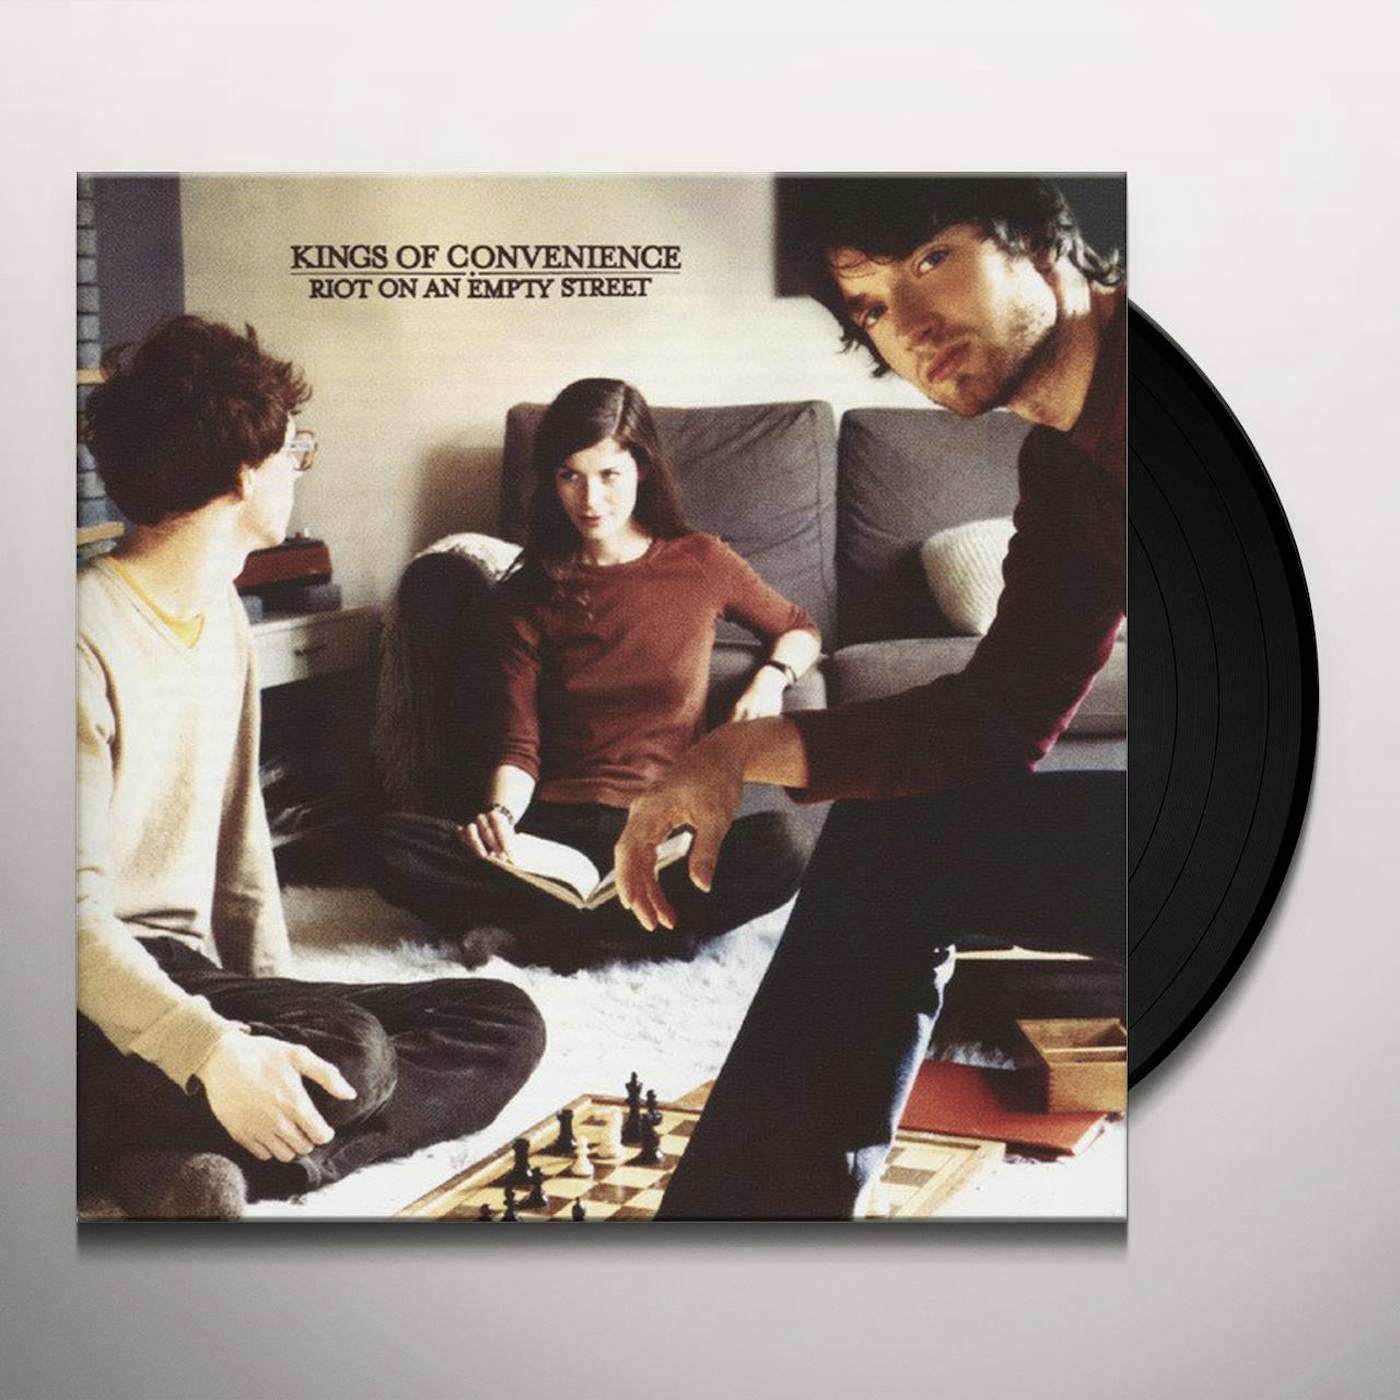 Kings of Convenience Riot On An Empty Street Vinyl Record